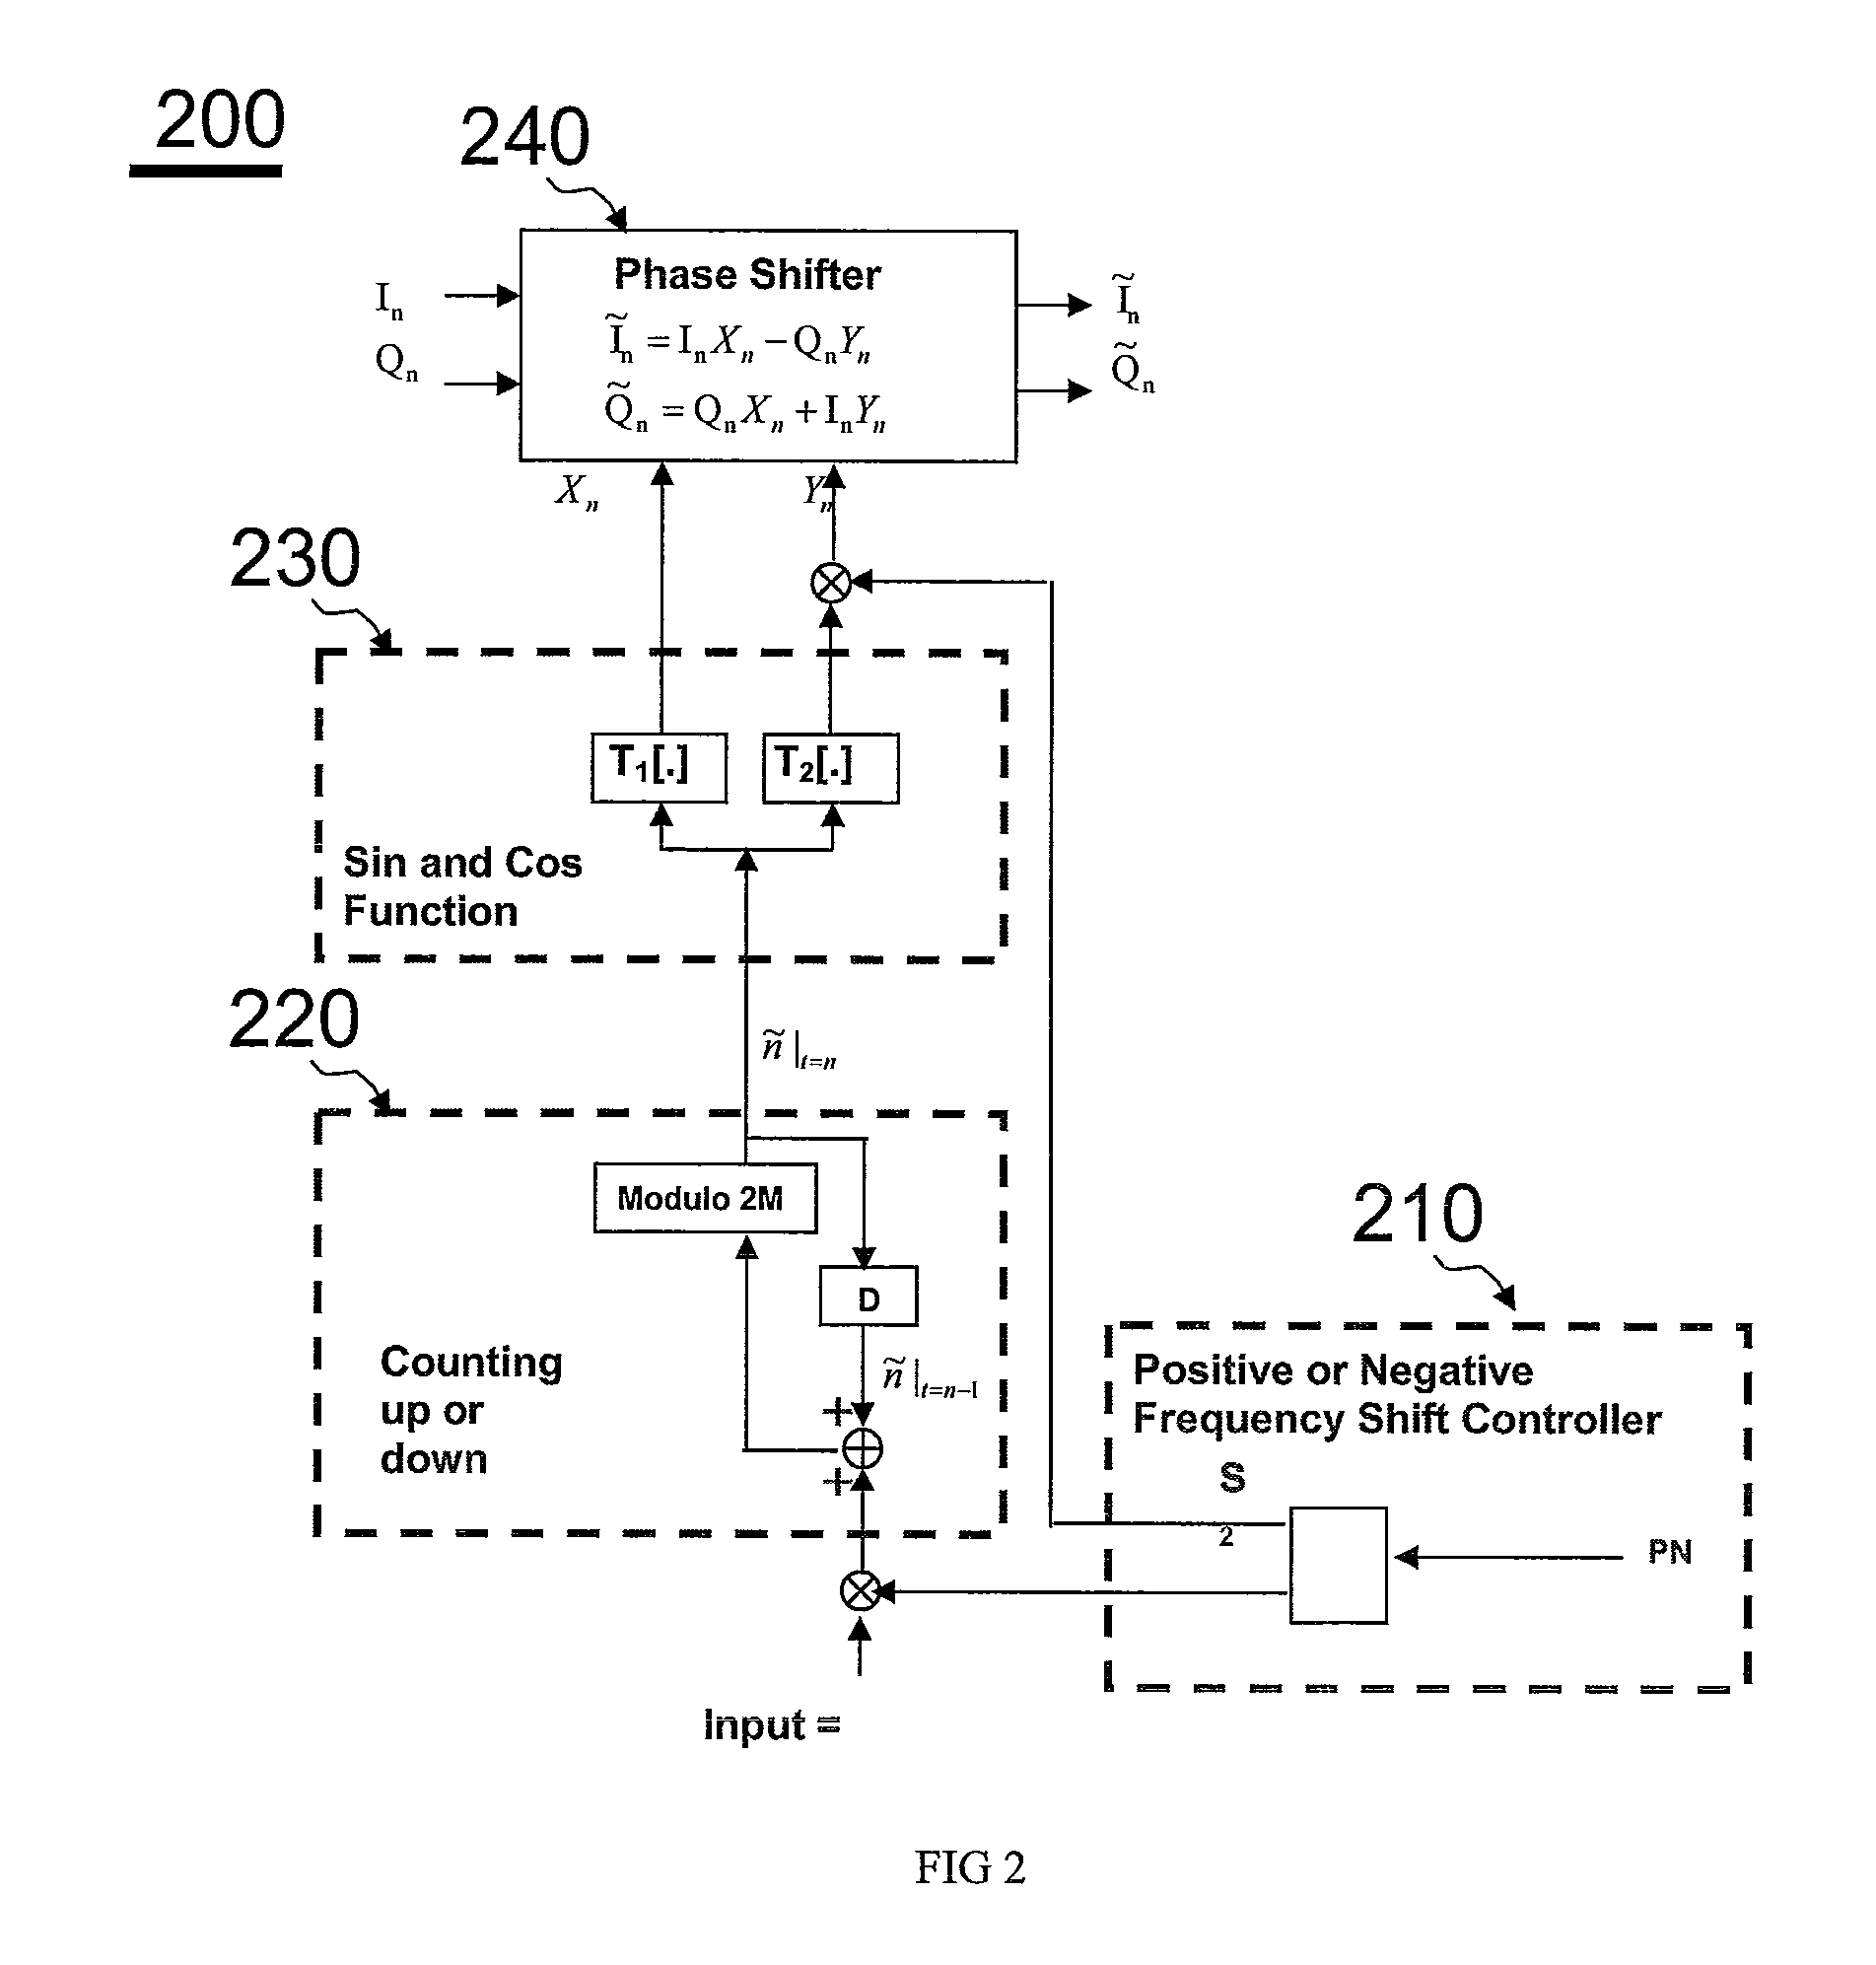 Arbitrary frequency shifter in communication systems